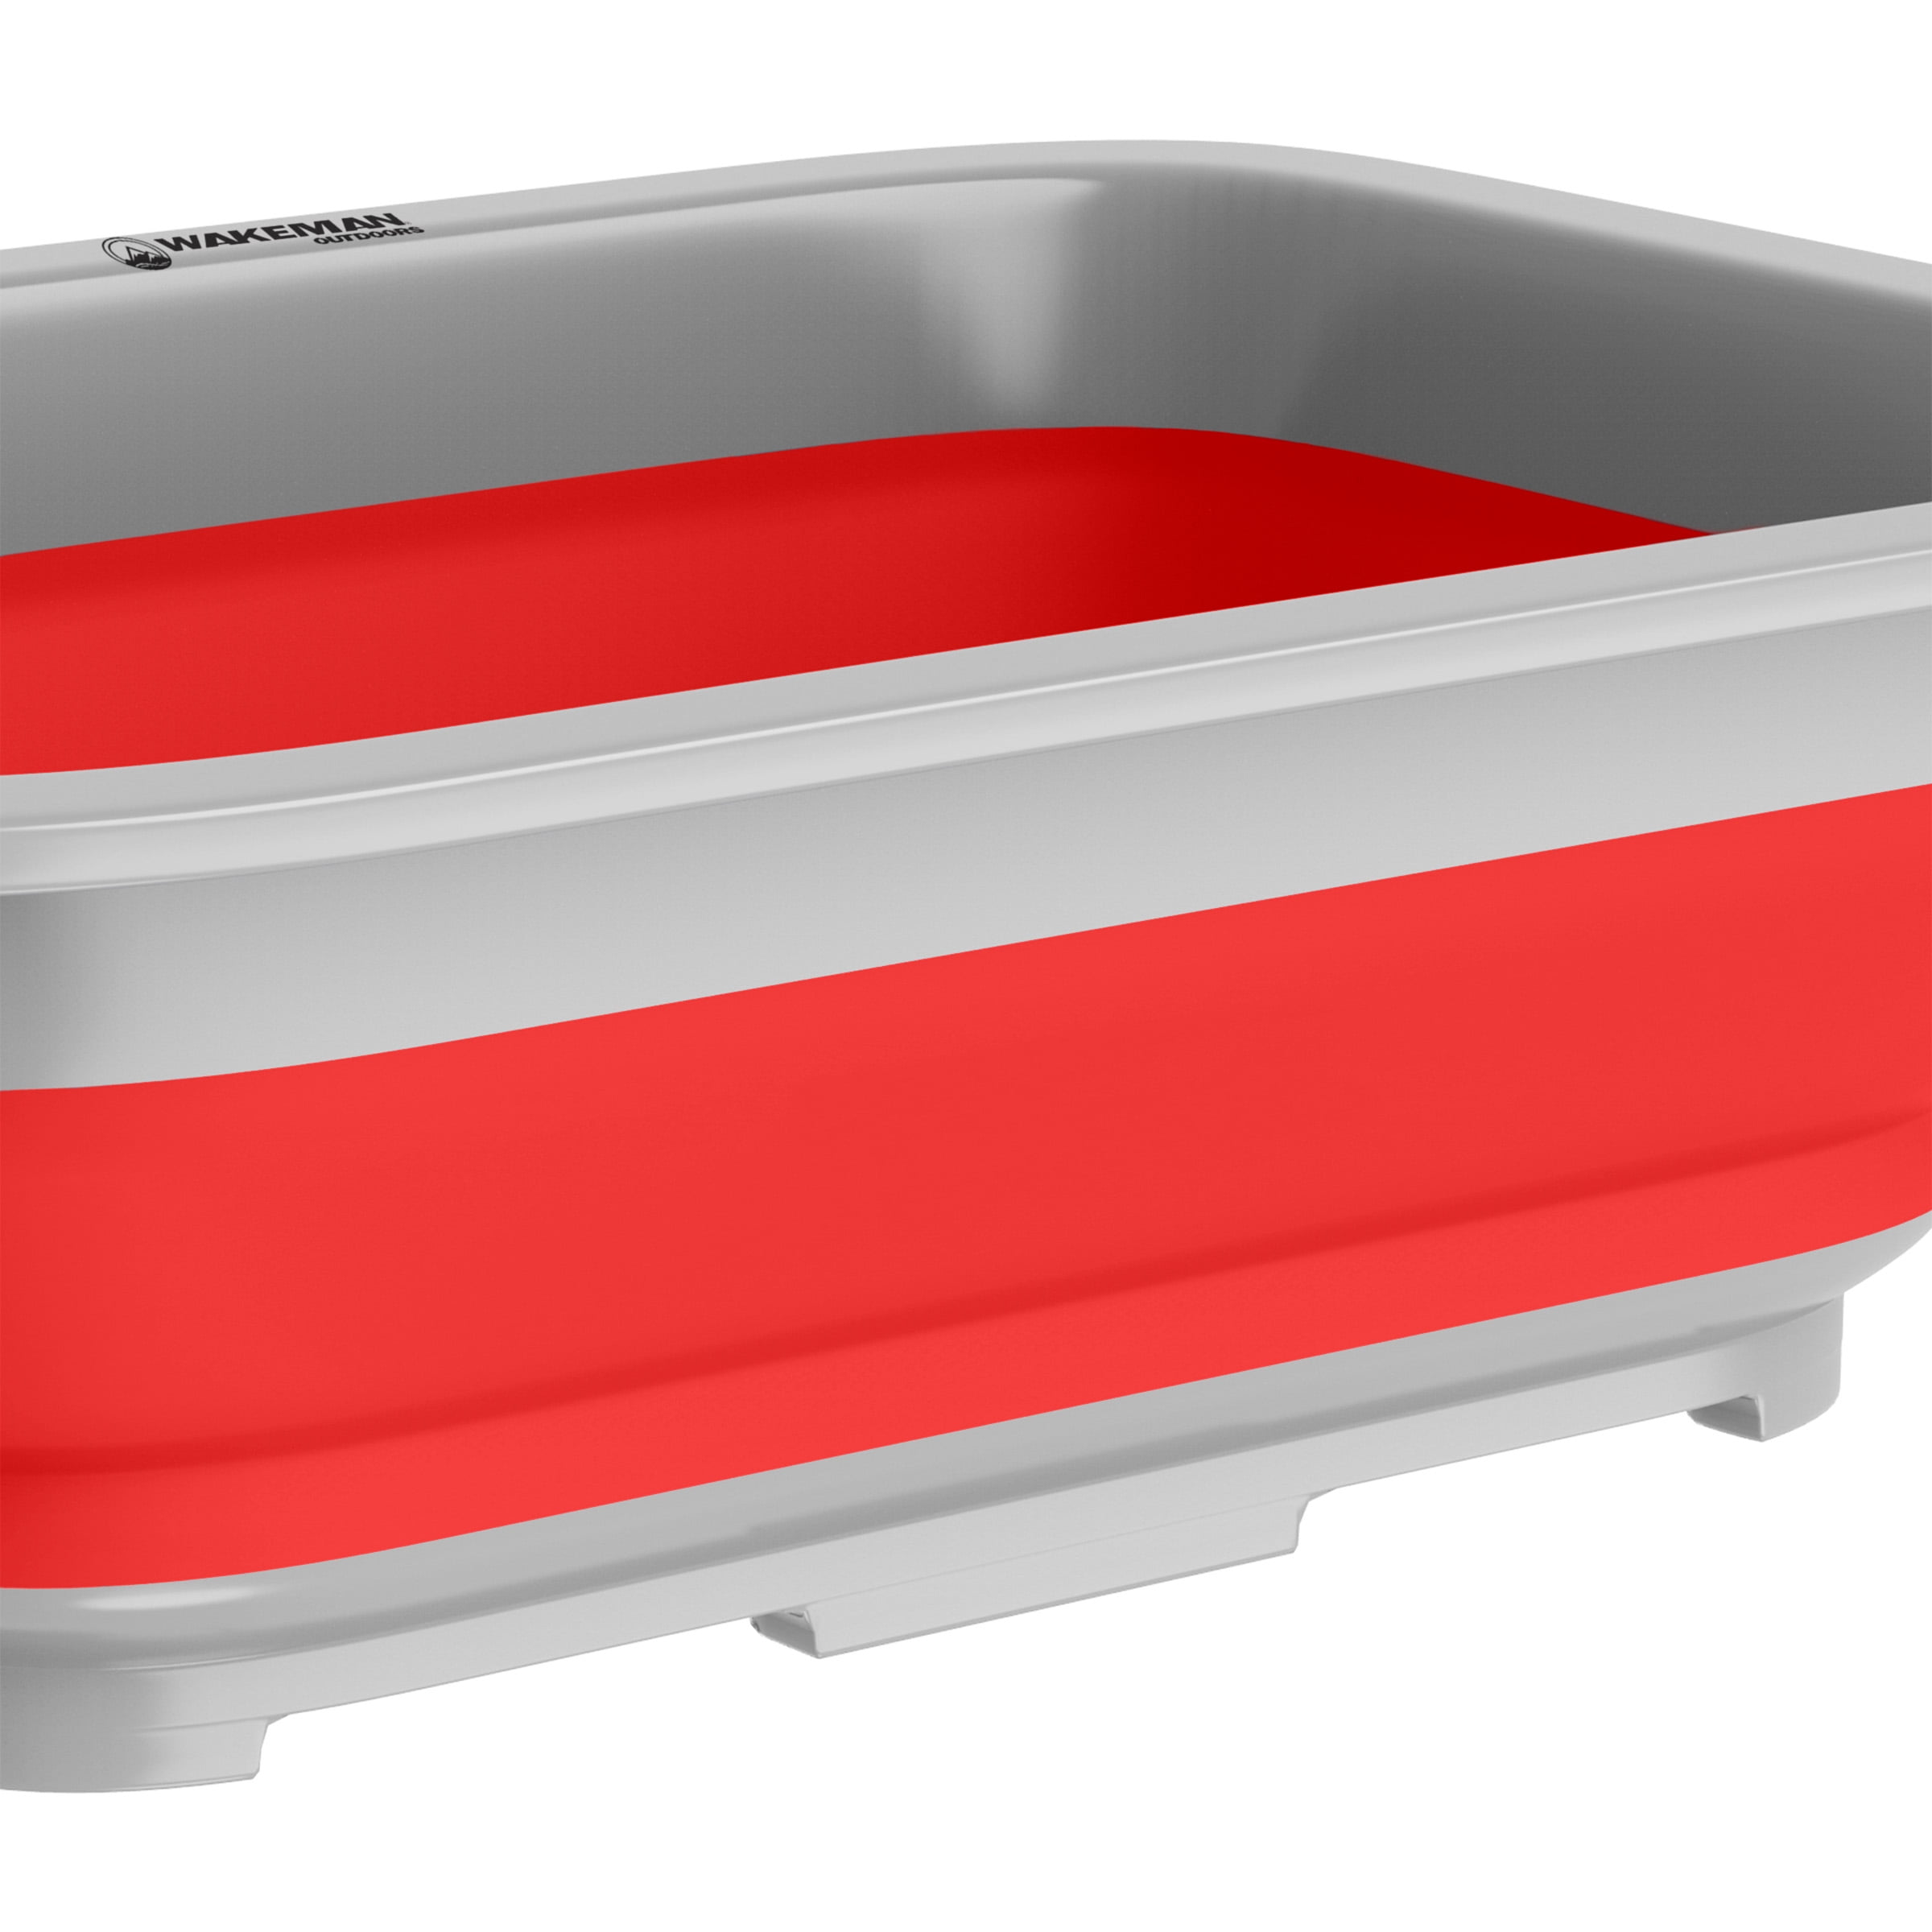 Collapsible Multiuse Wash Bin - Portable Wash Basin/dish Tub/ice Bucket  With 10 L Capacity For Camping, Tailgating, More By Wakeman Outdoors (red)  : Target